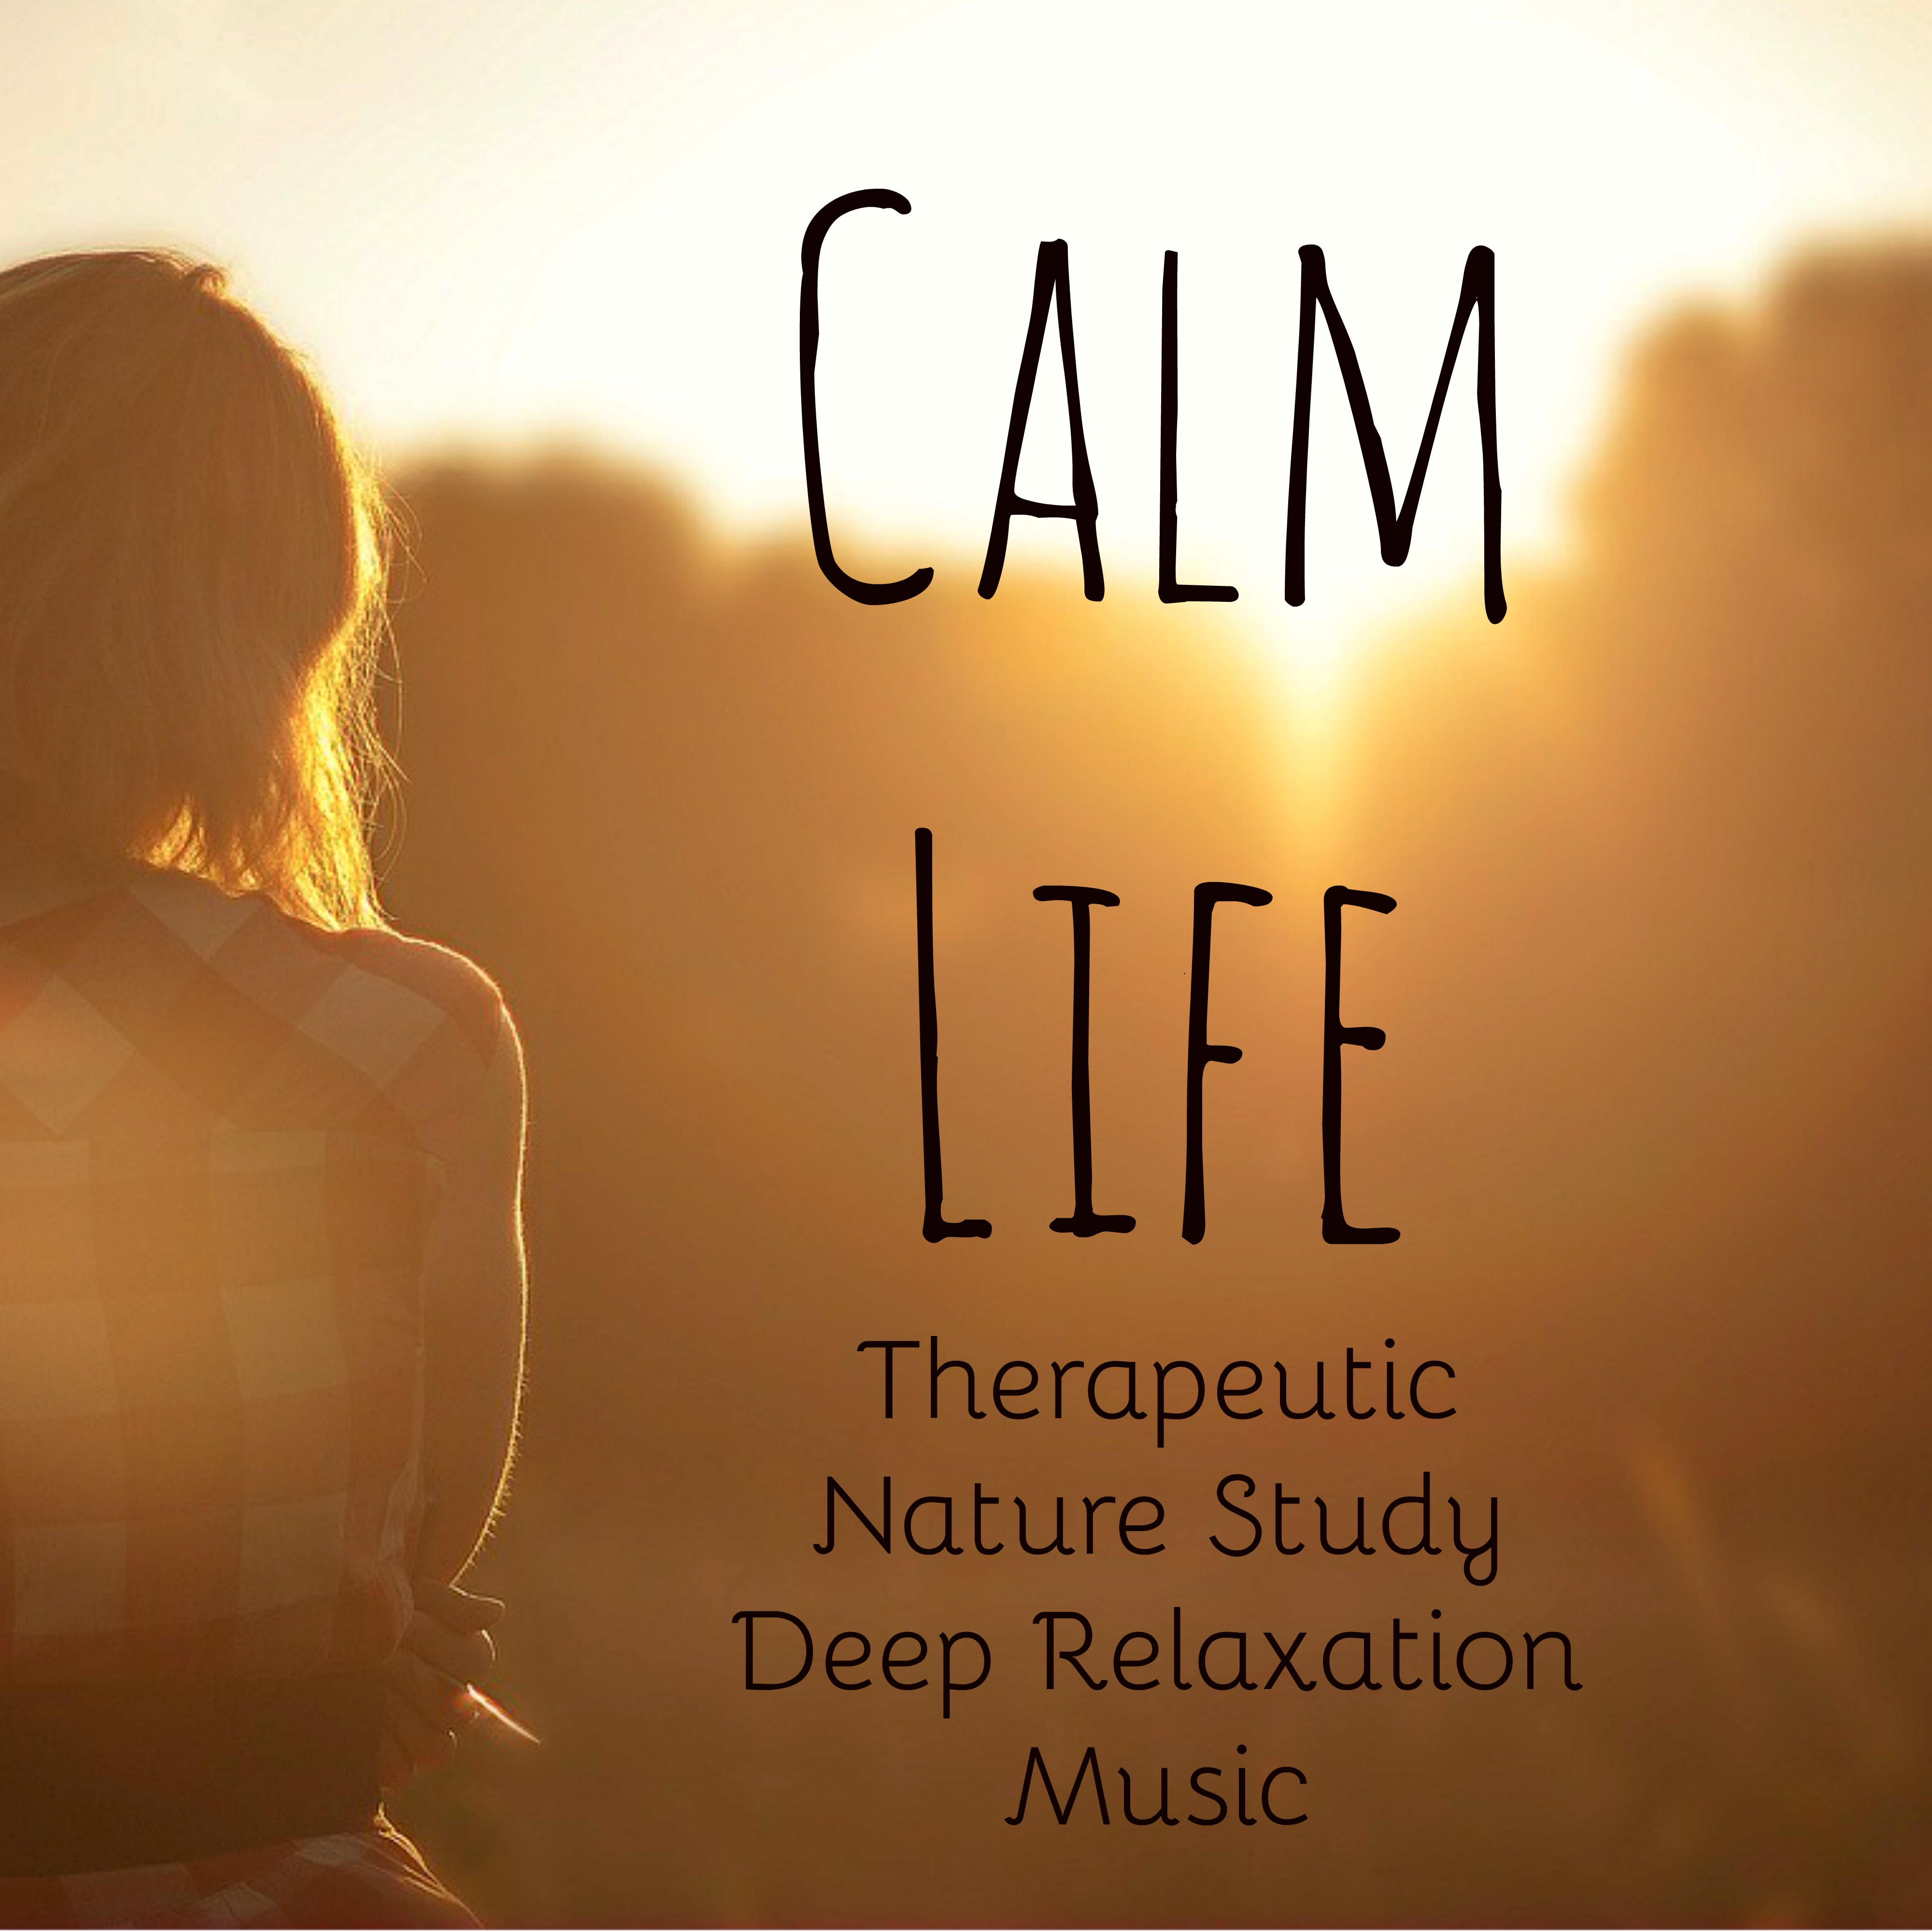 Calm Life - Therapeutic Nature Study Deep Relaxation Music for Wellness Treatment Smile Break Bio Energy with Soothing Meditative Instrumental Sounds